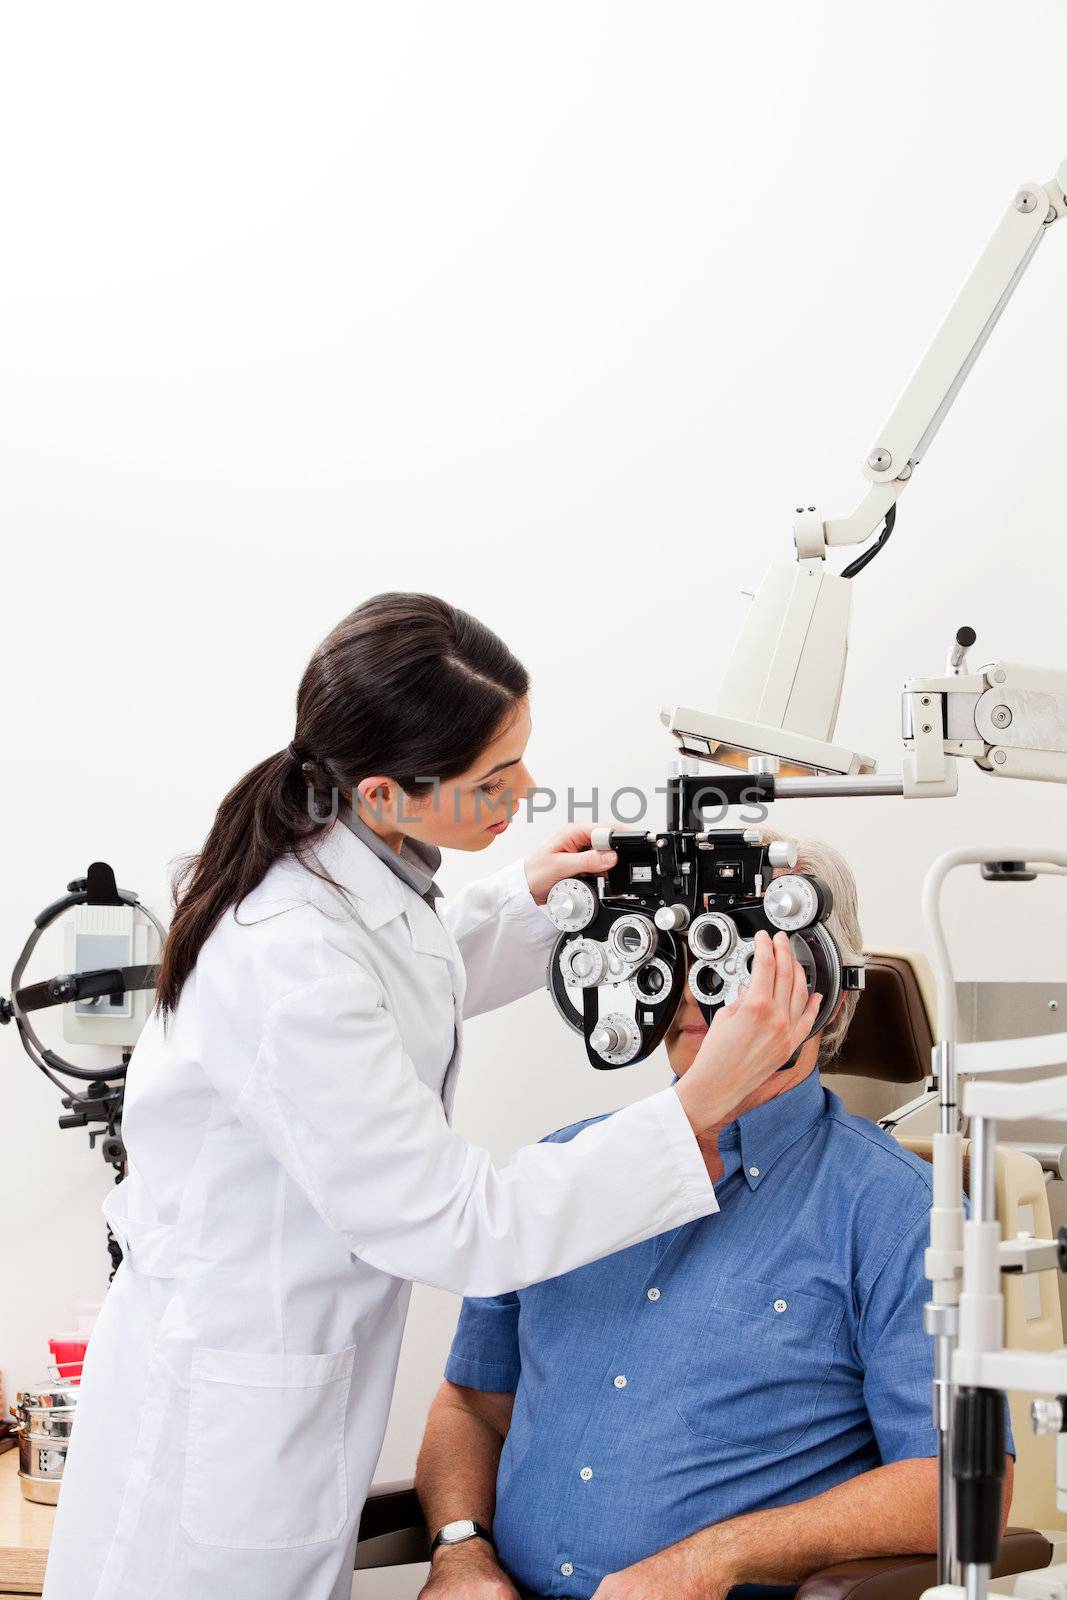 Eye Checkup With Phoropter by leaf